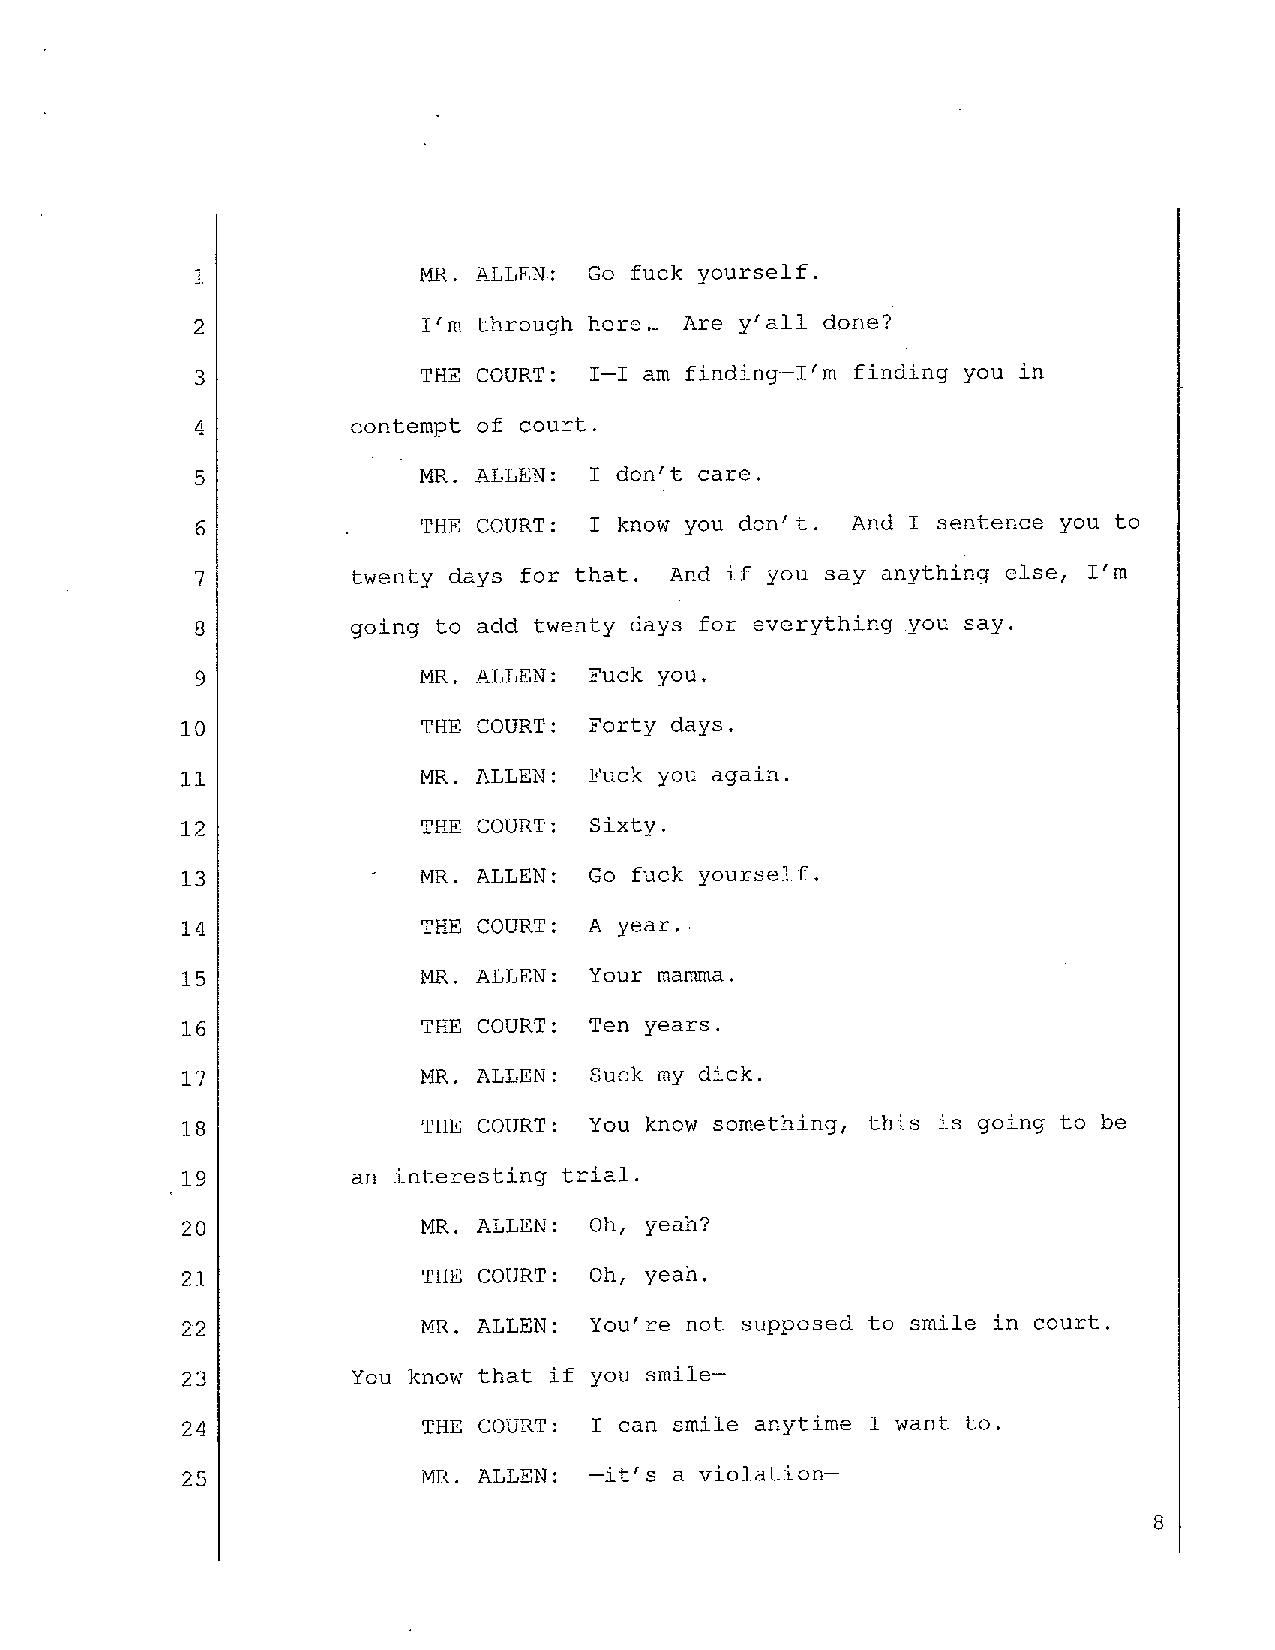 His request to have a new public defender was refused by Floyd County Superior Court Judge Bryant Durham, after Allen told the court that his current Public Defender couldn’t adequately represent him unless he had Allen’s d*ck in his mouth. With this in mind, take a look at what Allen said to the court.